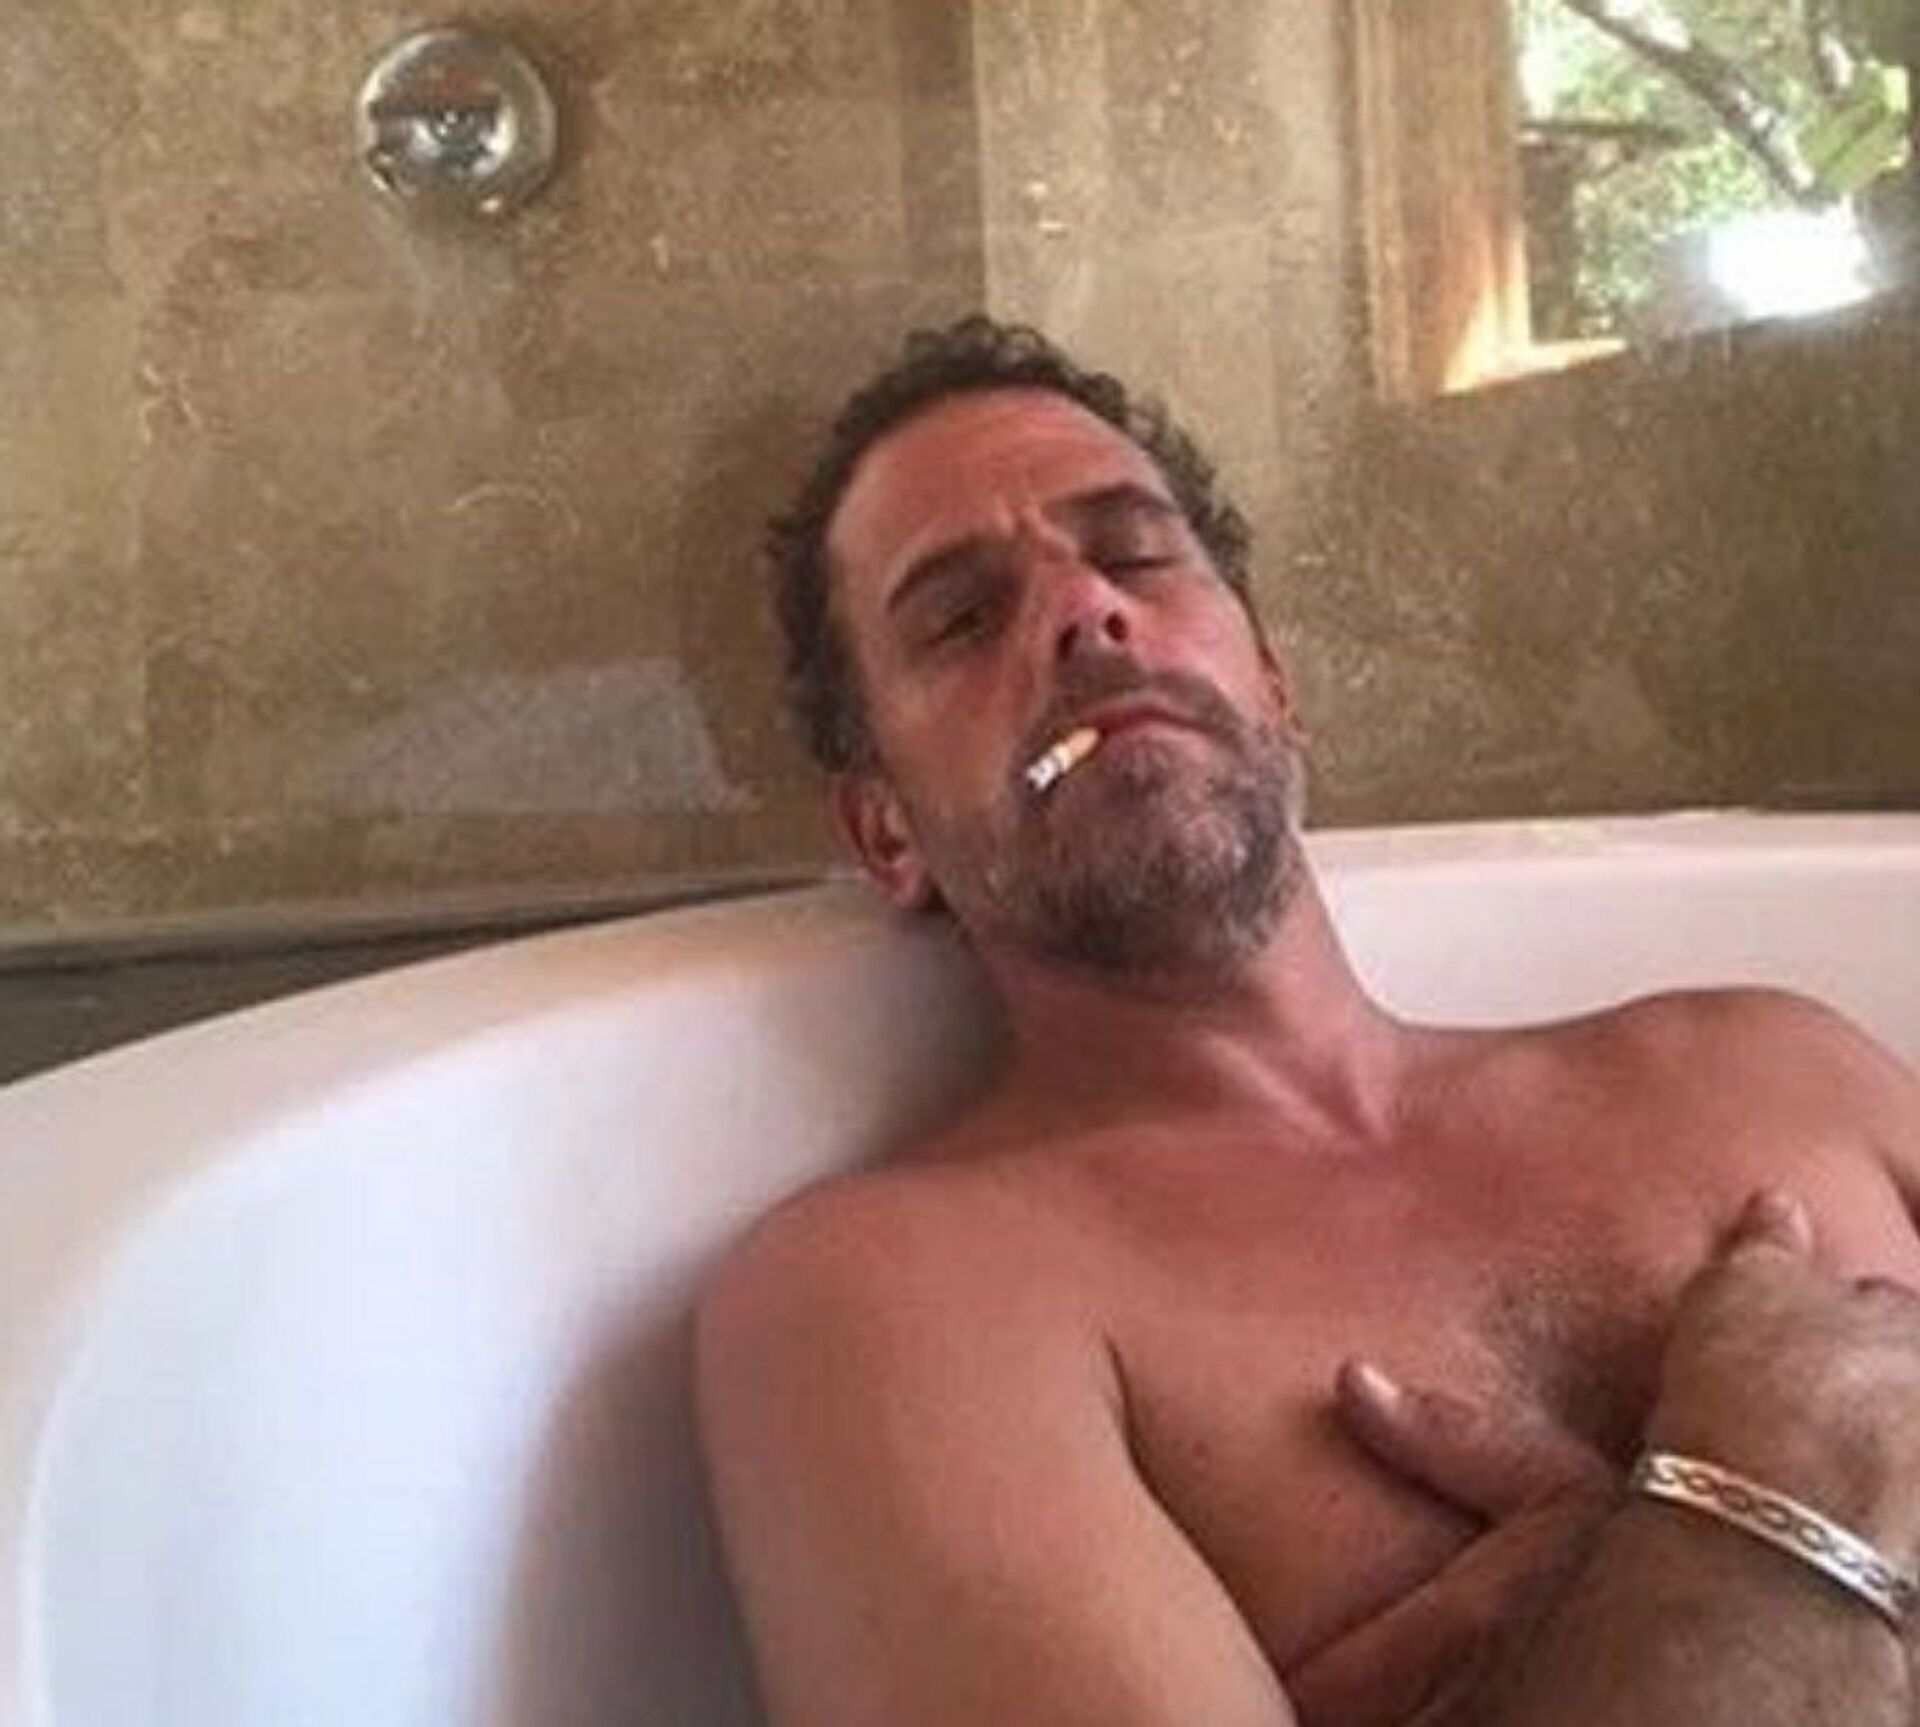 Photo of Hunter Biden relaxing in a bathtub, reportedly taken from a computer dropped off at a Delaware computer repair shop. - Sputnik International, 1920, 19.05.2022